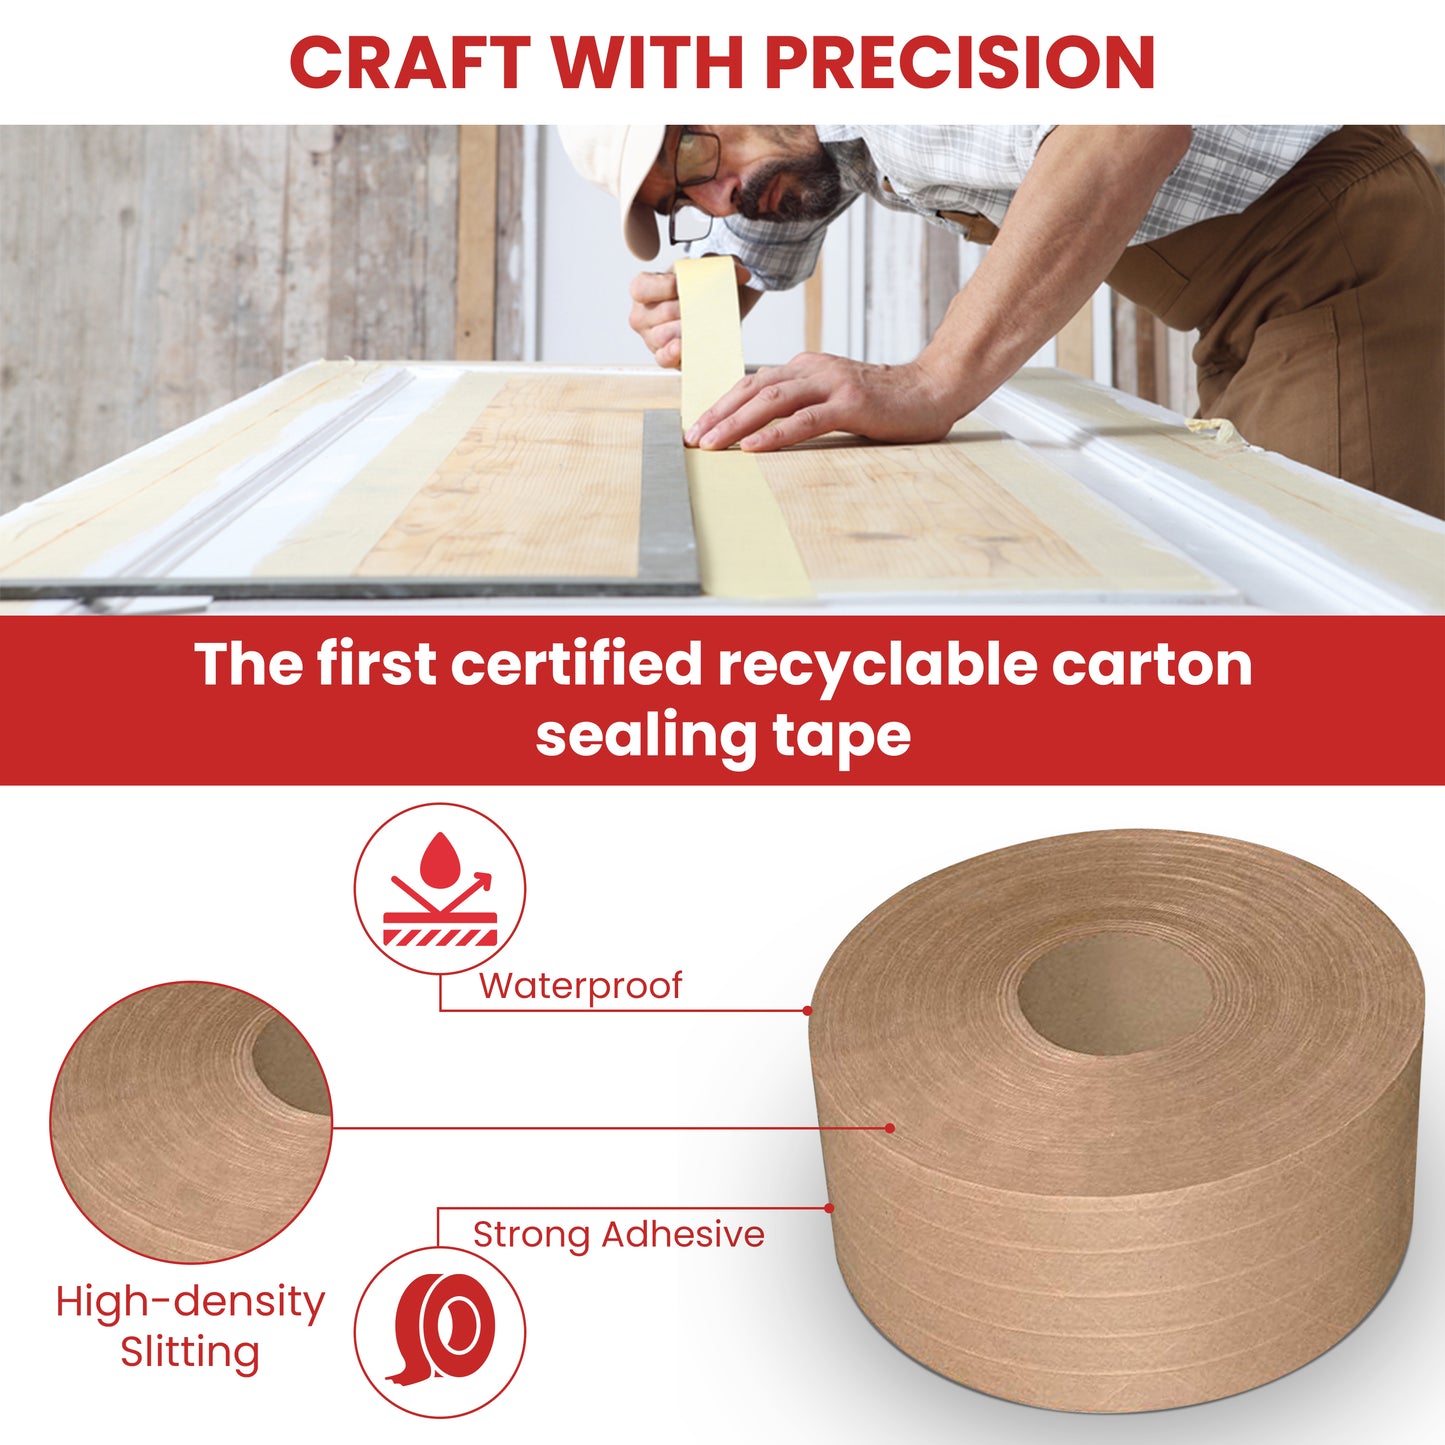 RECYCLABLE CARTON SEALING TAPE